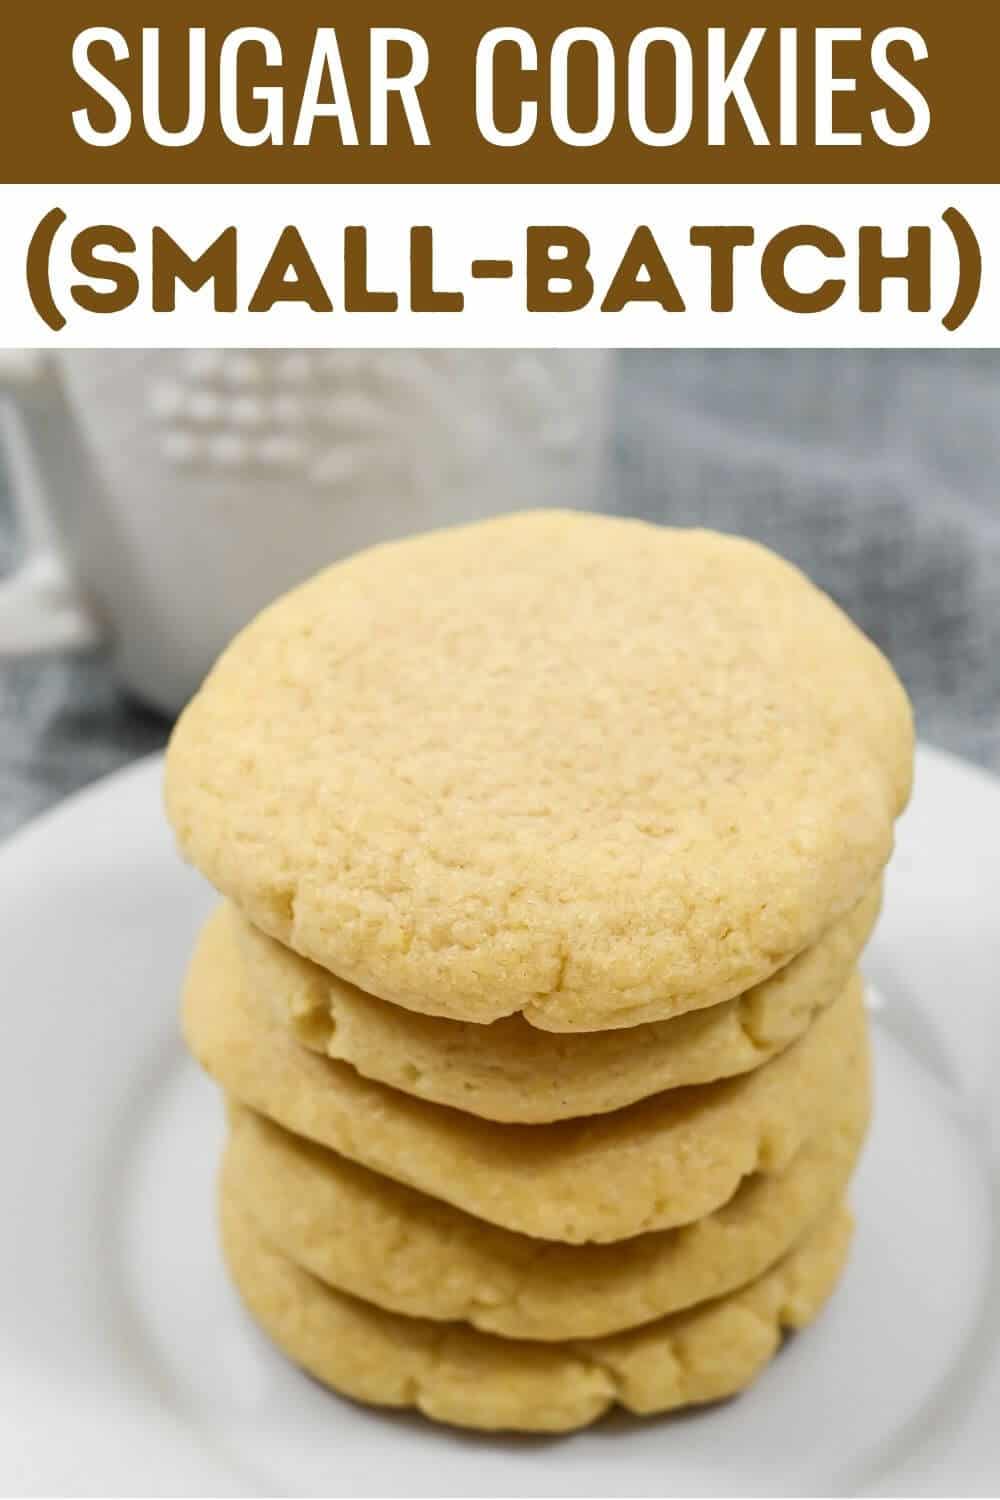 Stack of homemade sugar cookies with text overlay "sugar cookies (small-batch).